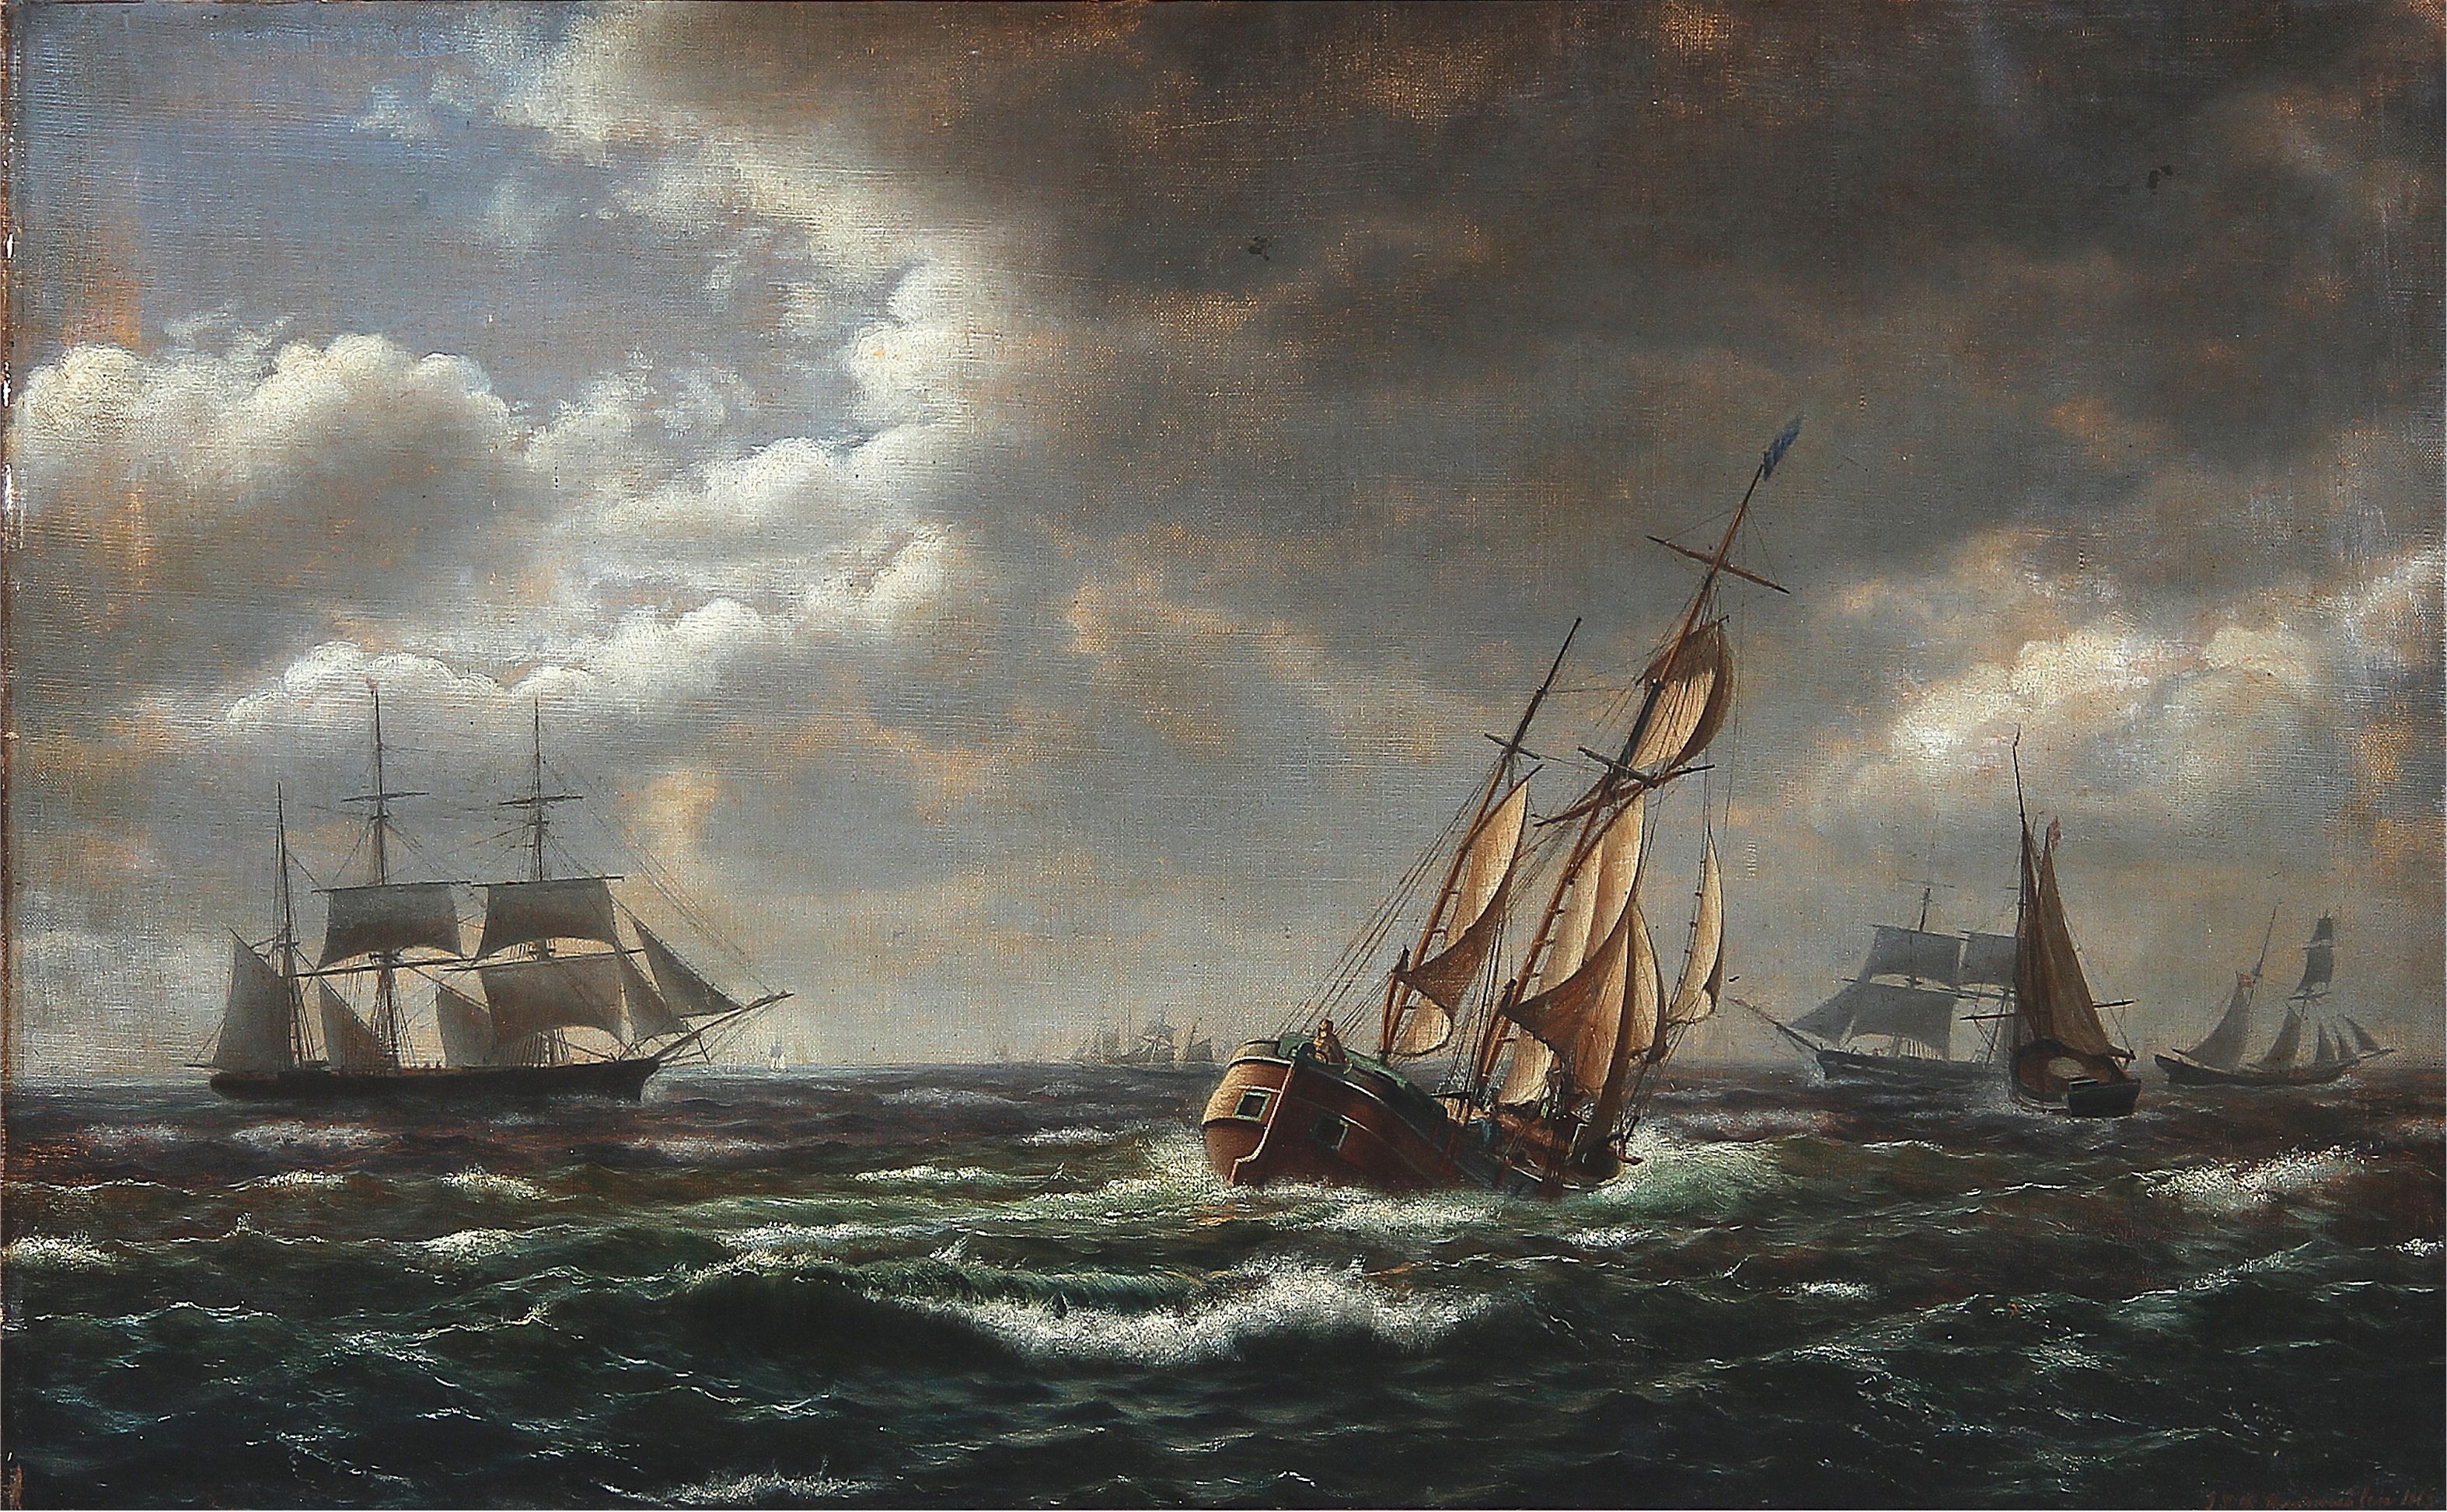 I. E. C. Rasmussen - Seascape with sailing ships in high waves (1863)